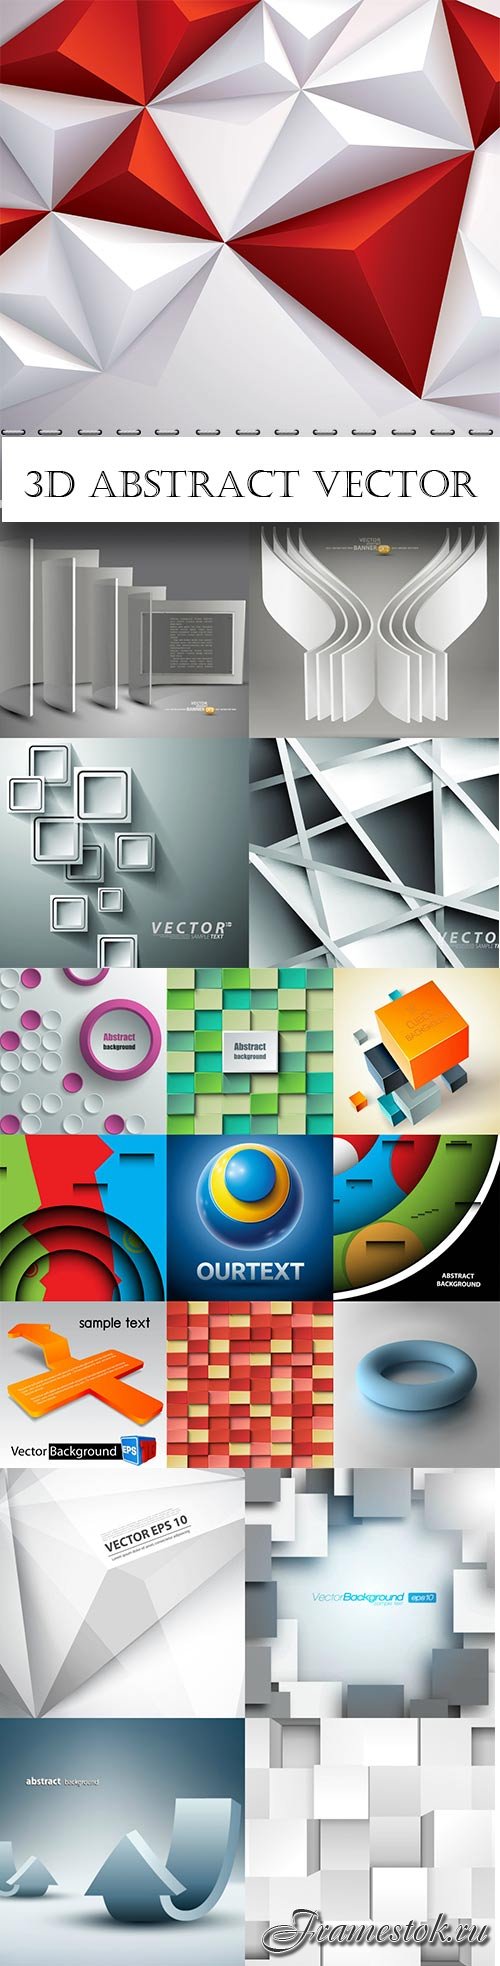 3D abstract vector backgrounds